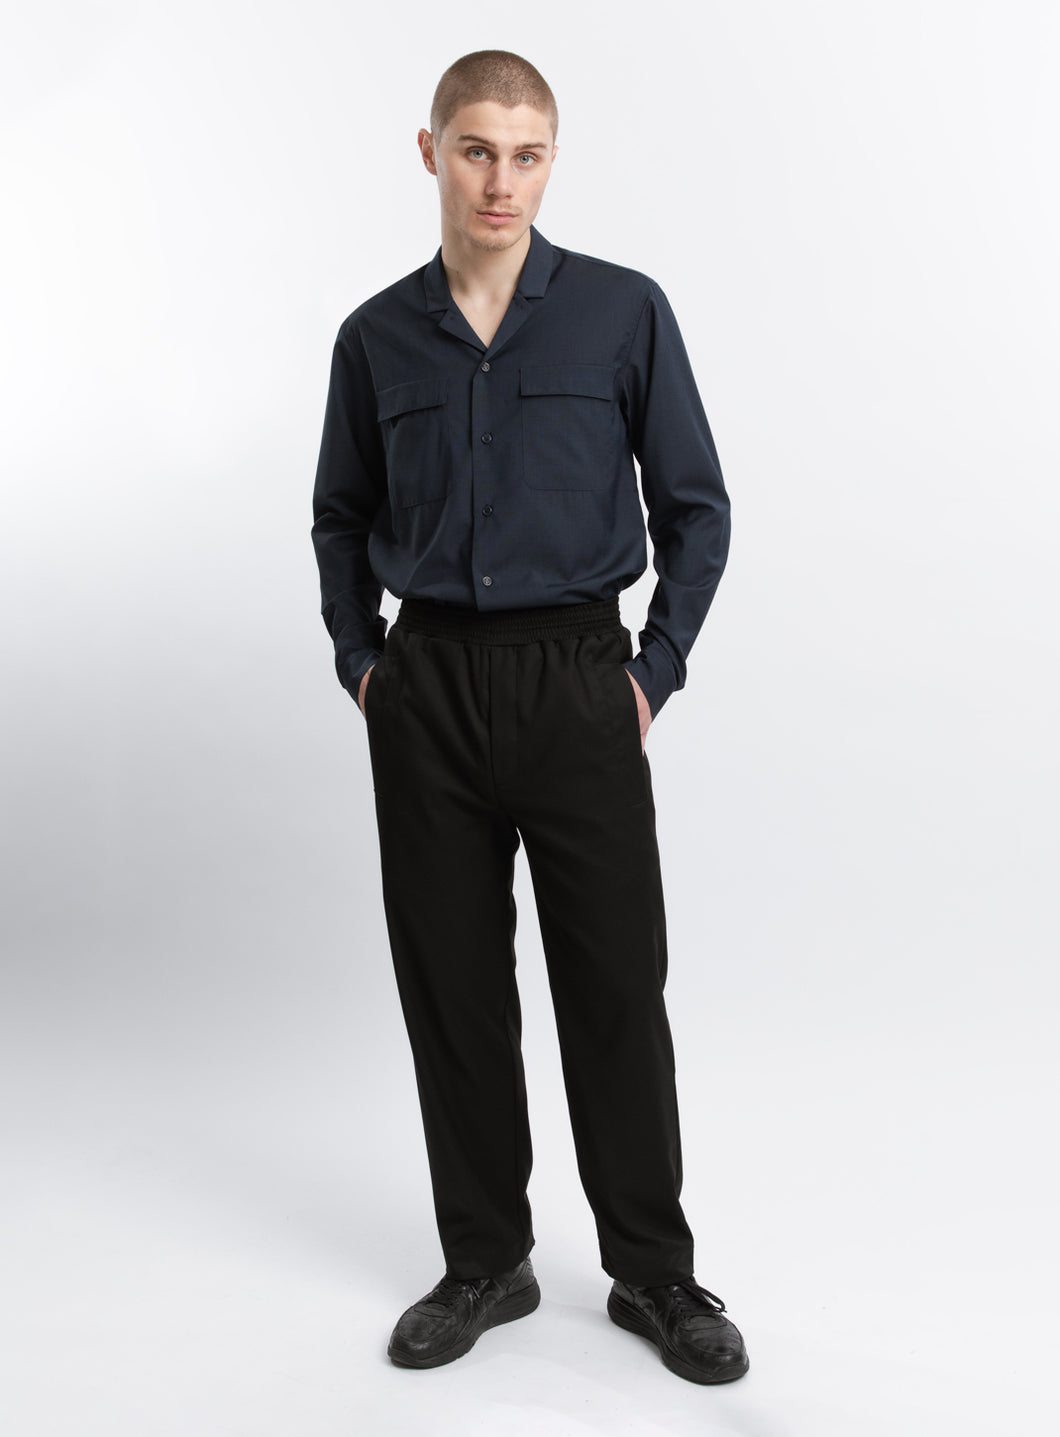 Overshirt with Tailored Collar in Navy Blue Serge